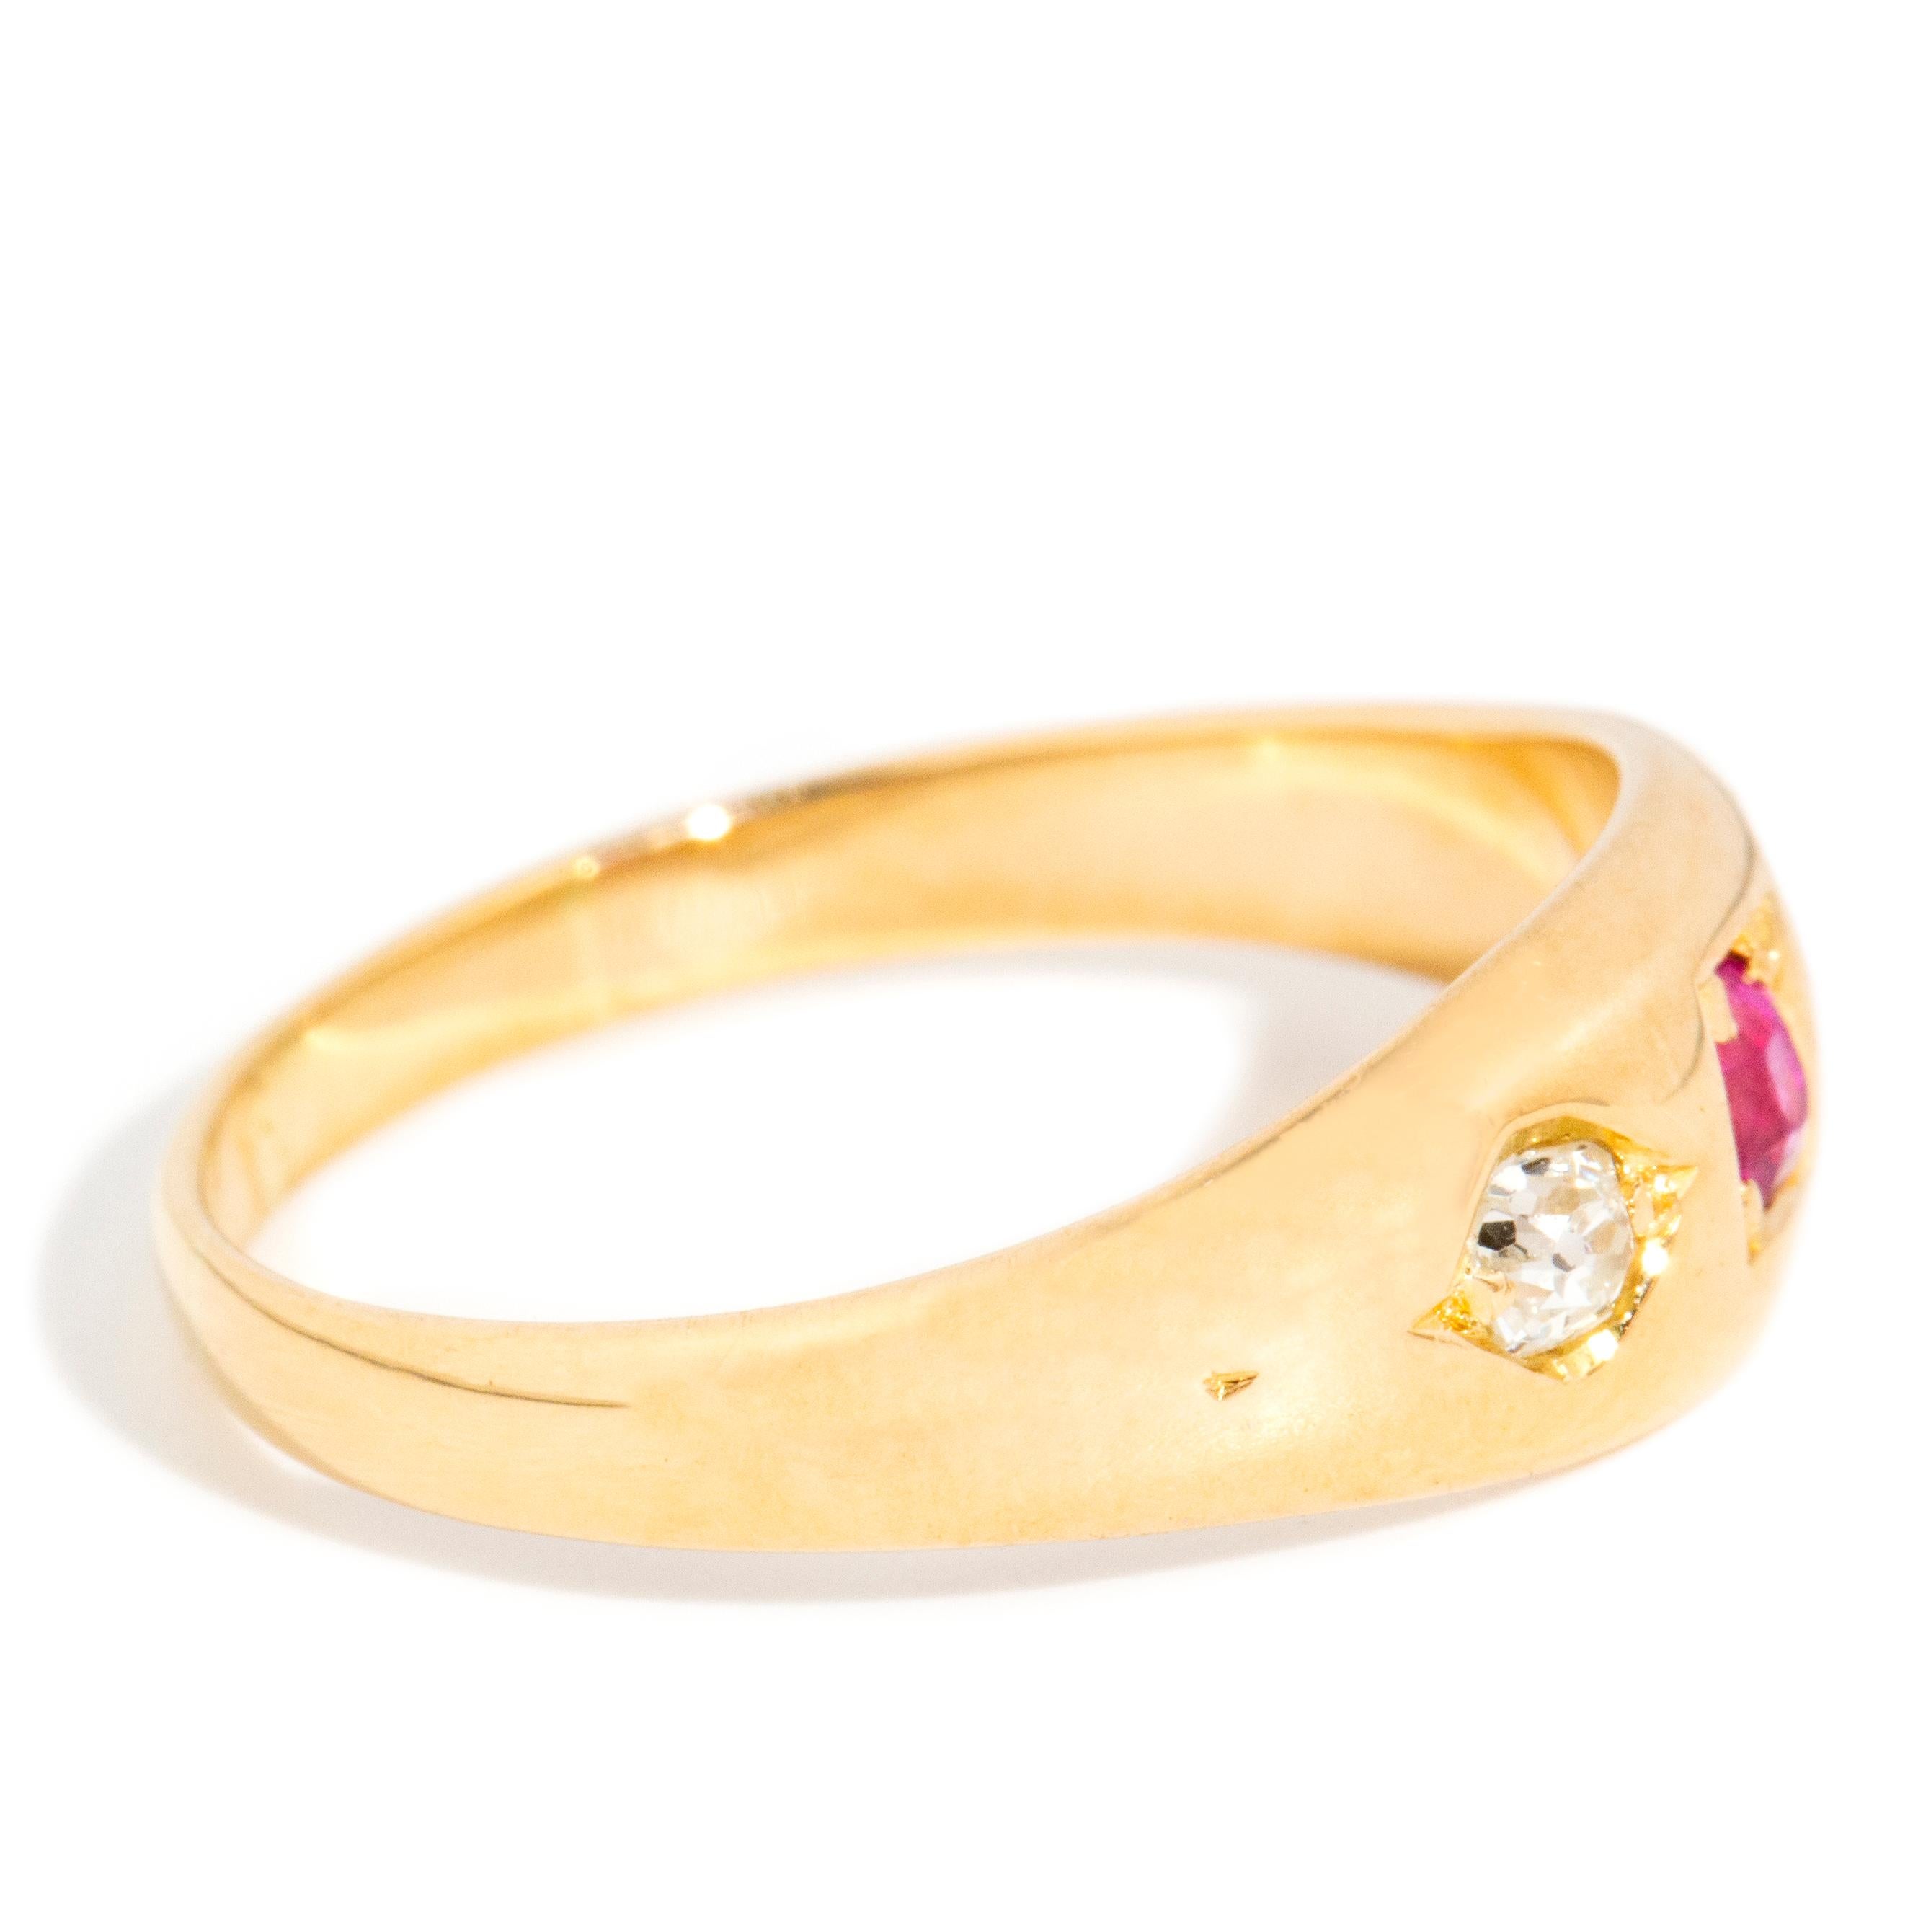 Antique Victorian Era Bright Red Pink Ruby & Old Cut Diamond Ring 18 Carat Gold For Sale 1